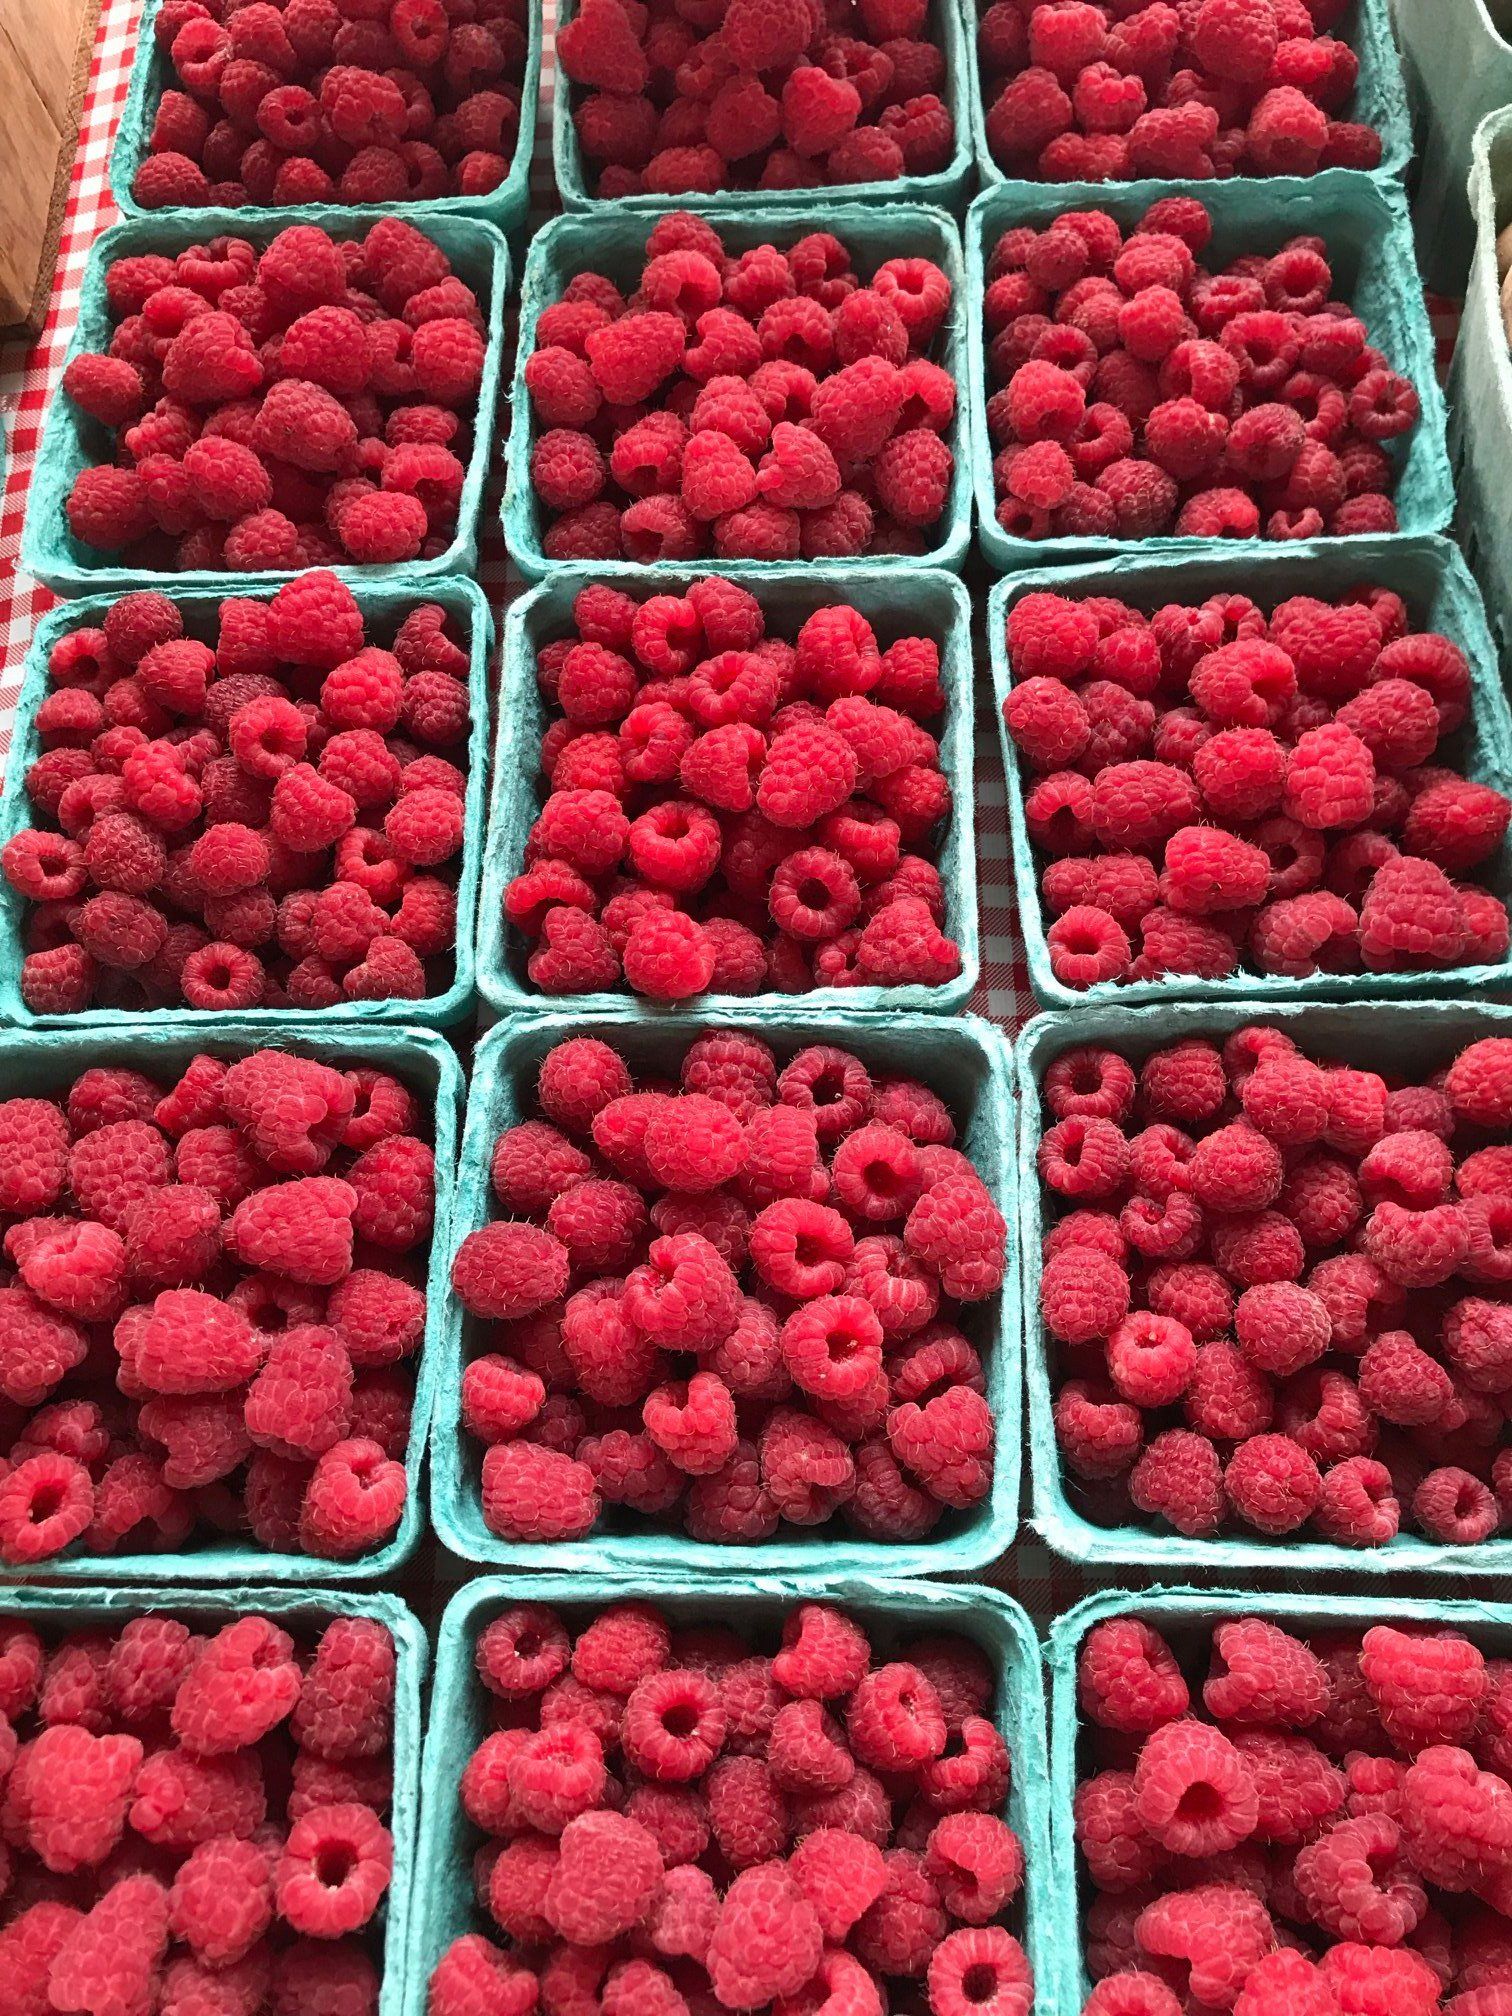 Previous Happening: Raspberries Are Back!